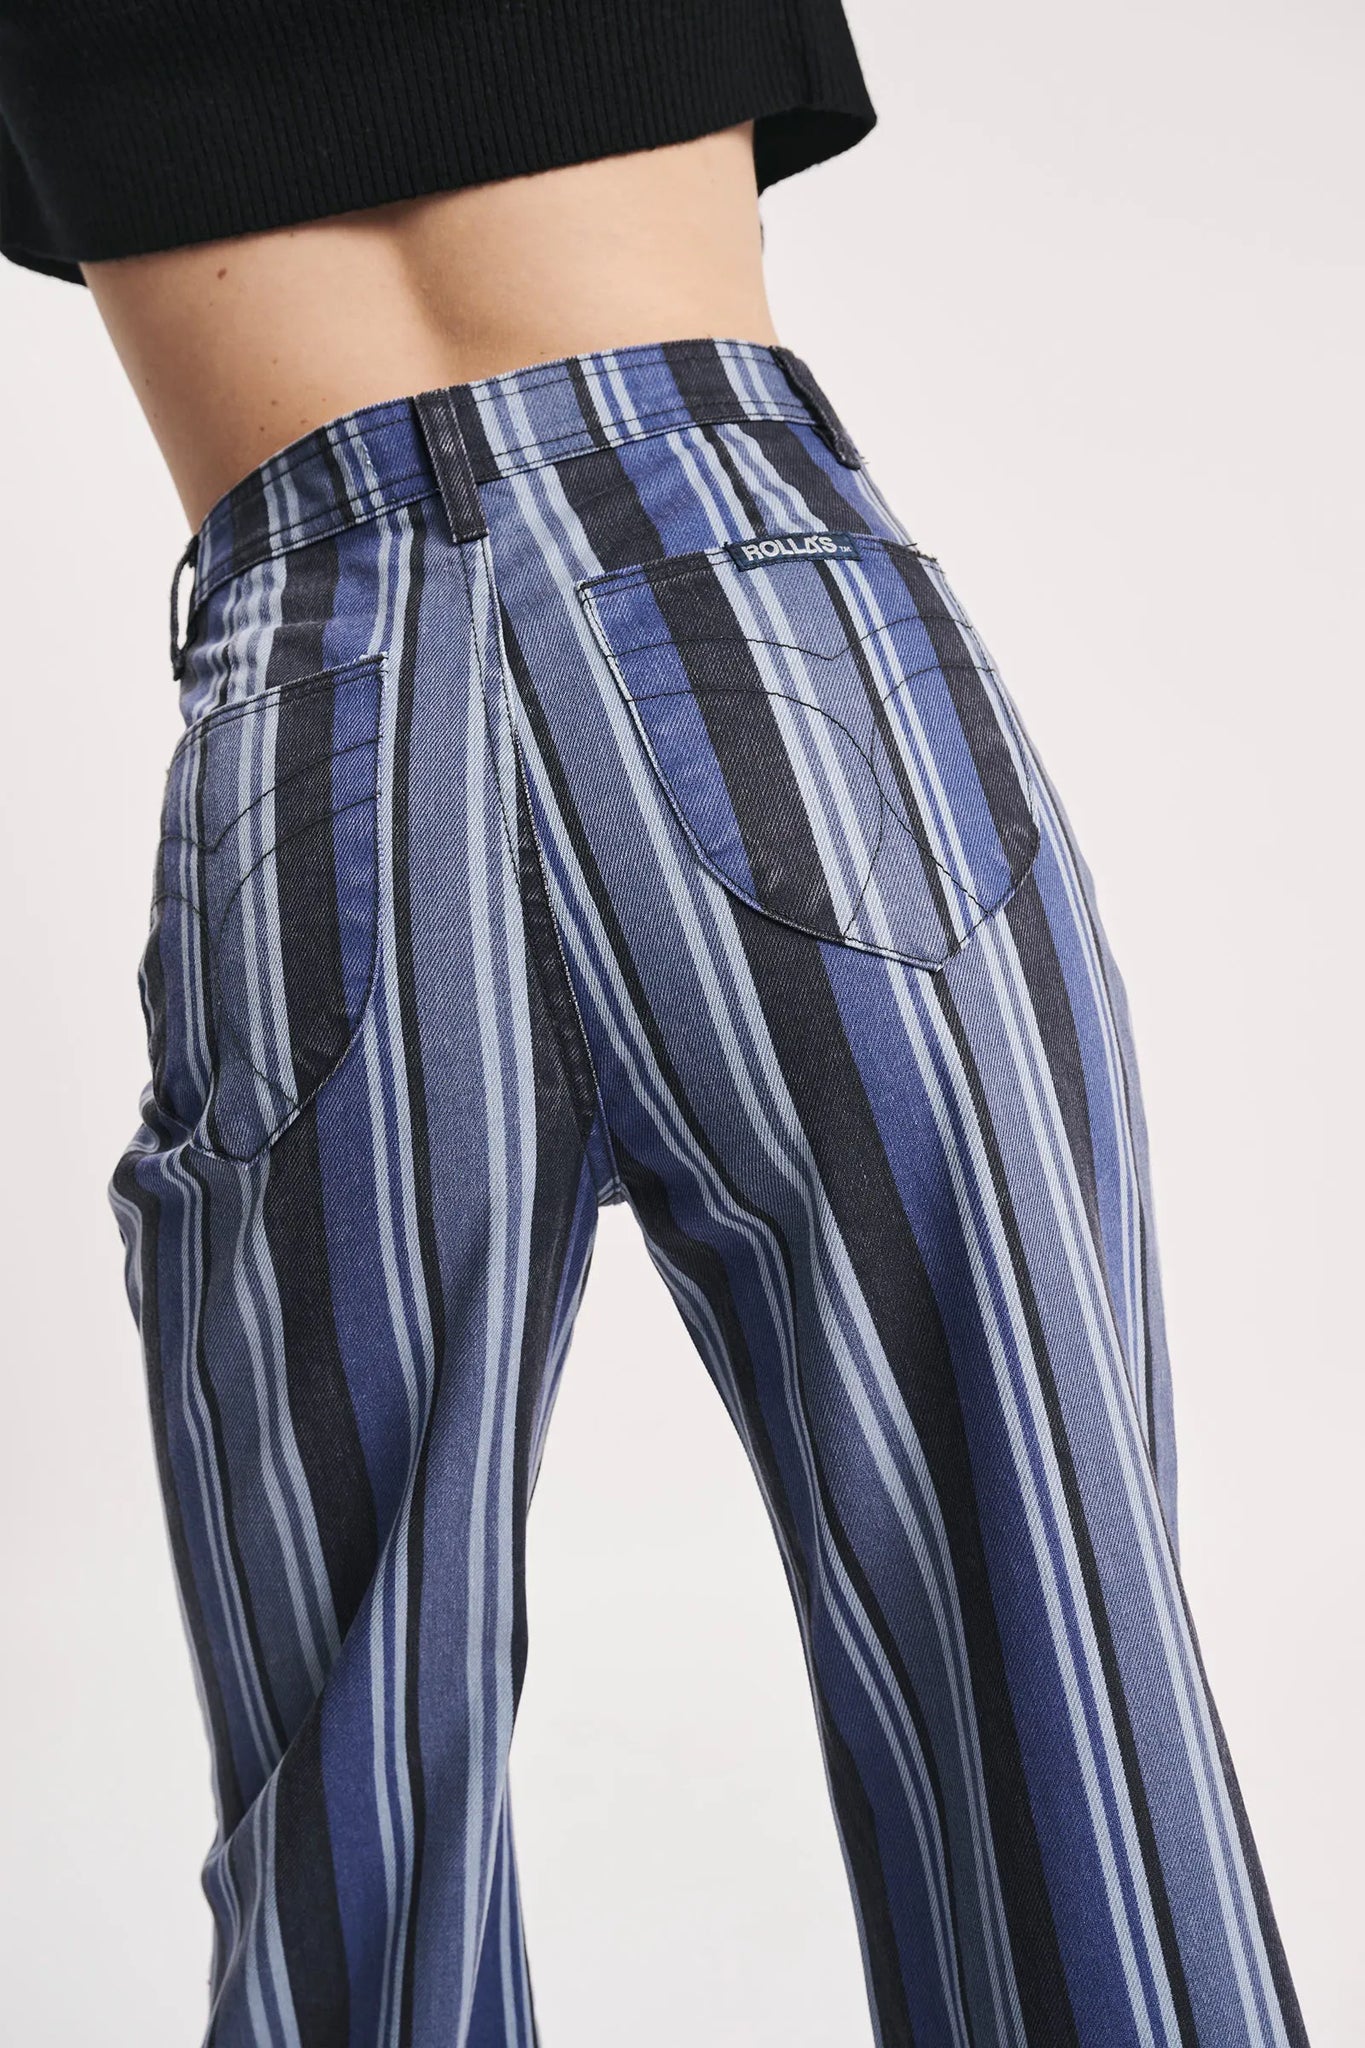 ROLLA'S STANFORD SAILOR PANT